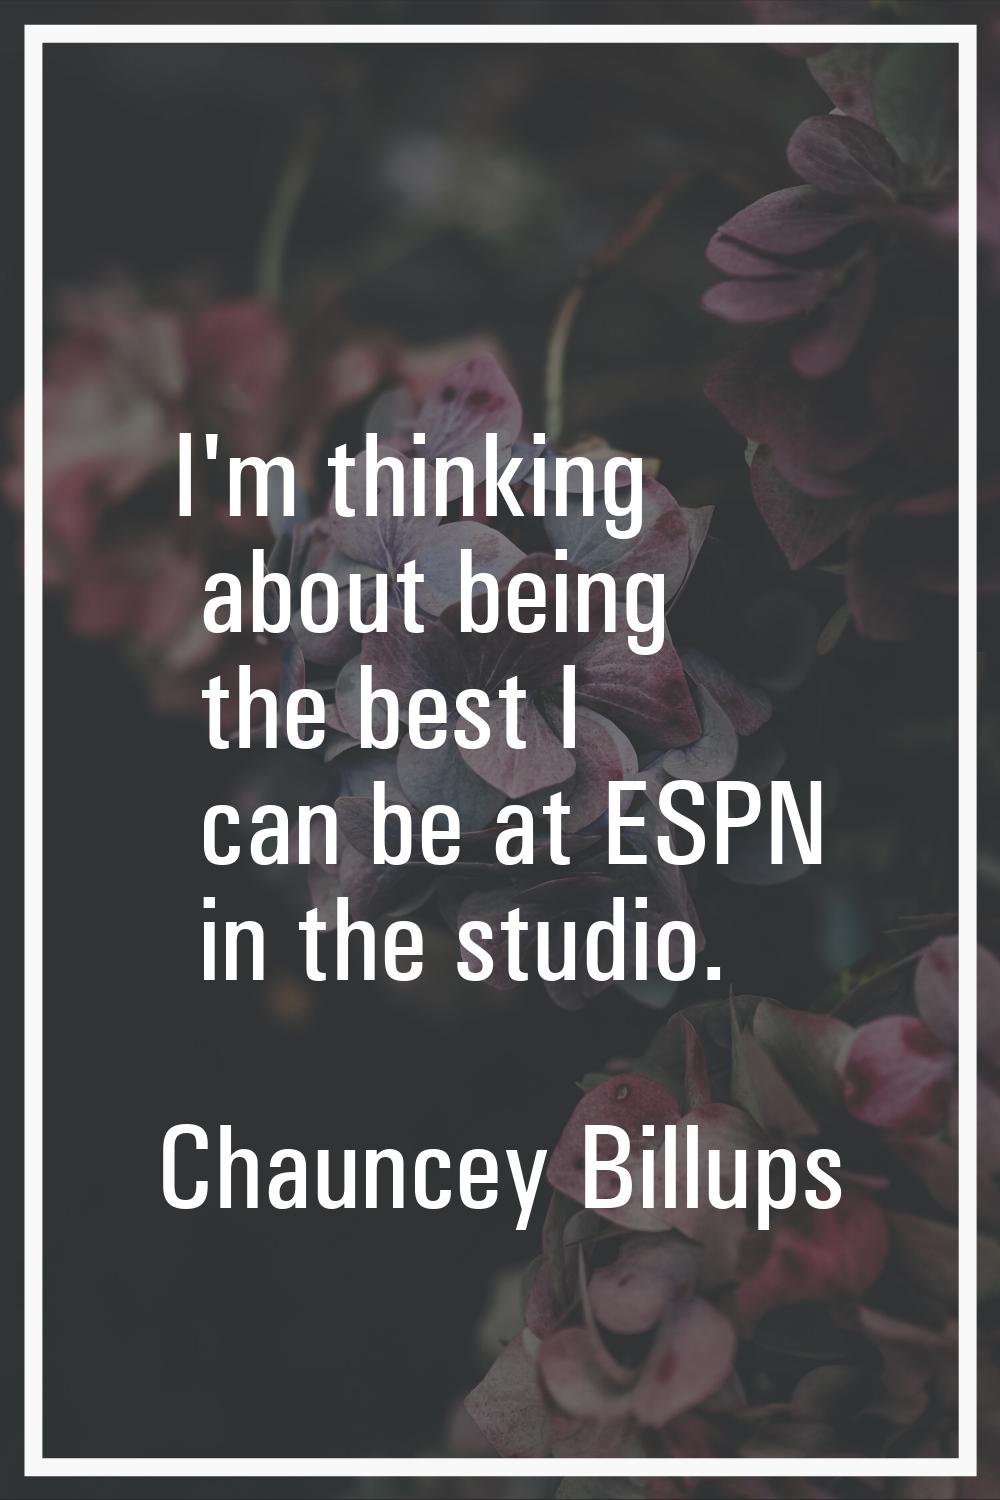 I'm thinking about being the best I can be at ESPN in the studio.